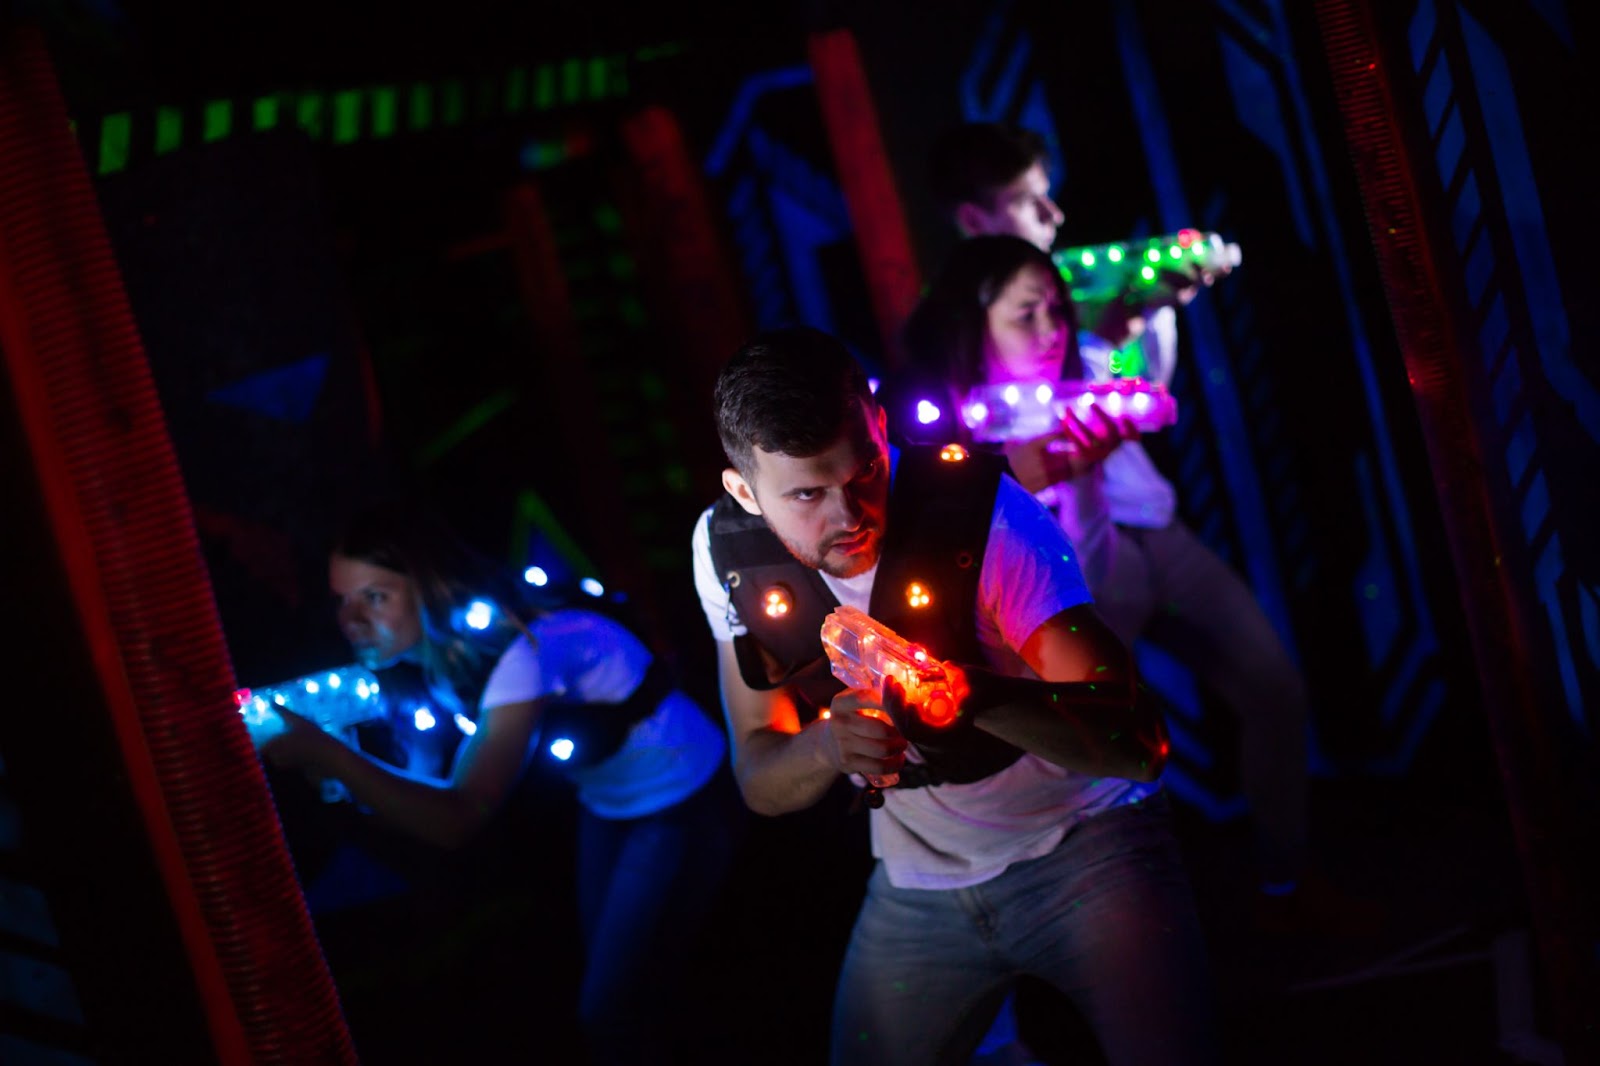 A vibrant group having fun with glow sticks during an epic night out at a bowling alley or laser tag arena